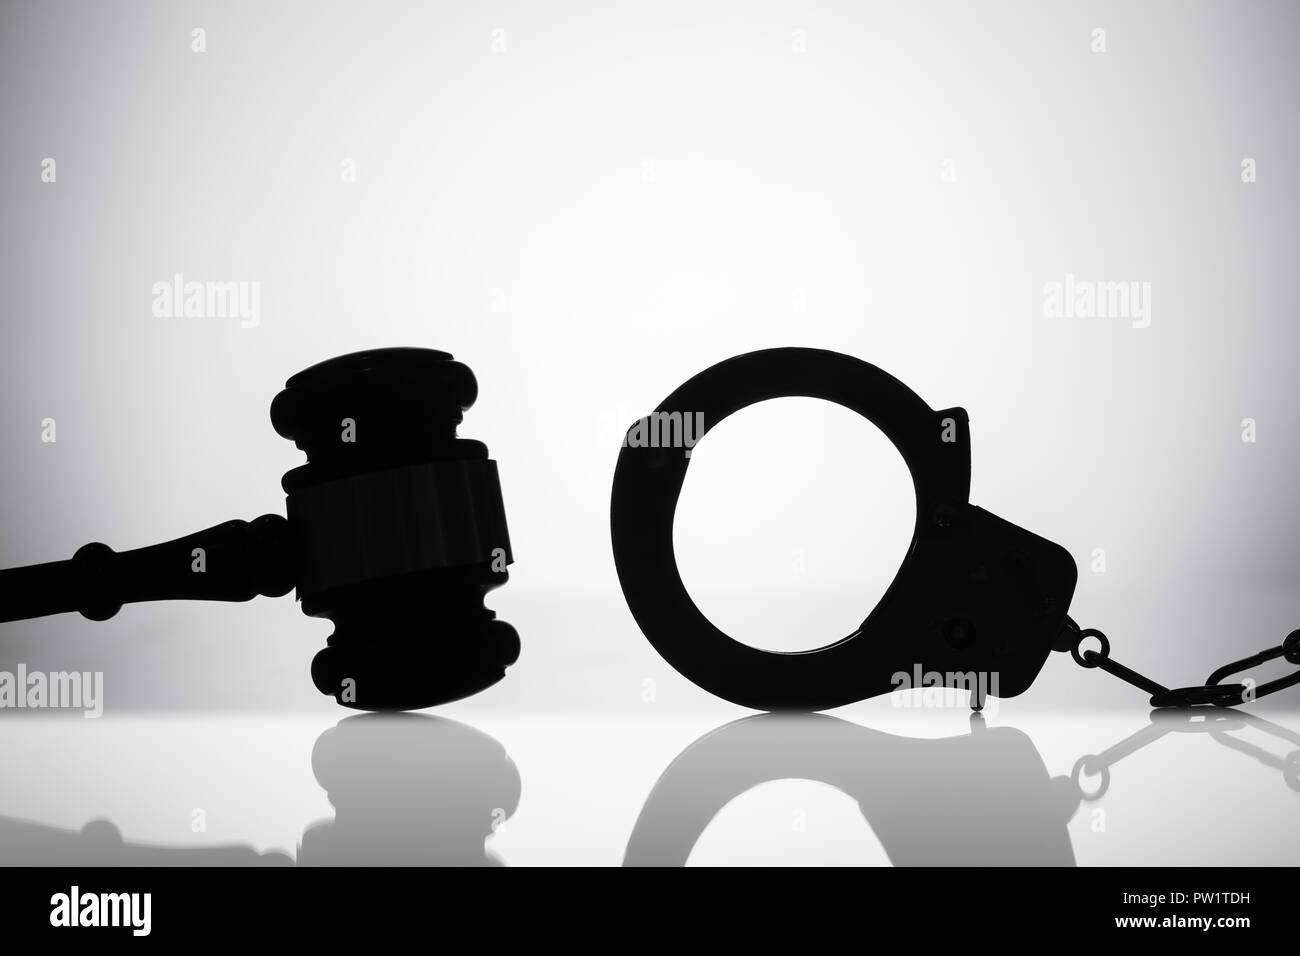 Silhouette Of Handcuff Near Gavel With Sounding Block On Reflective Background Stock Photo